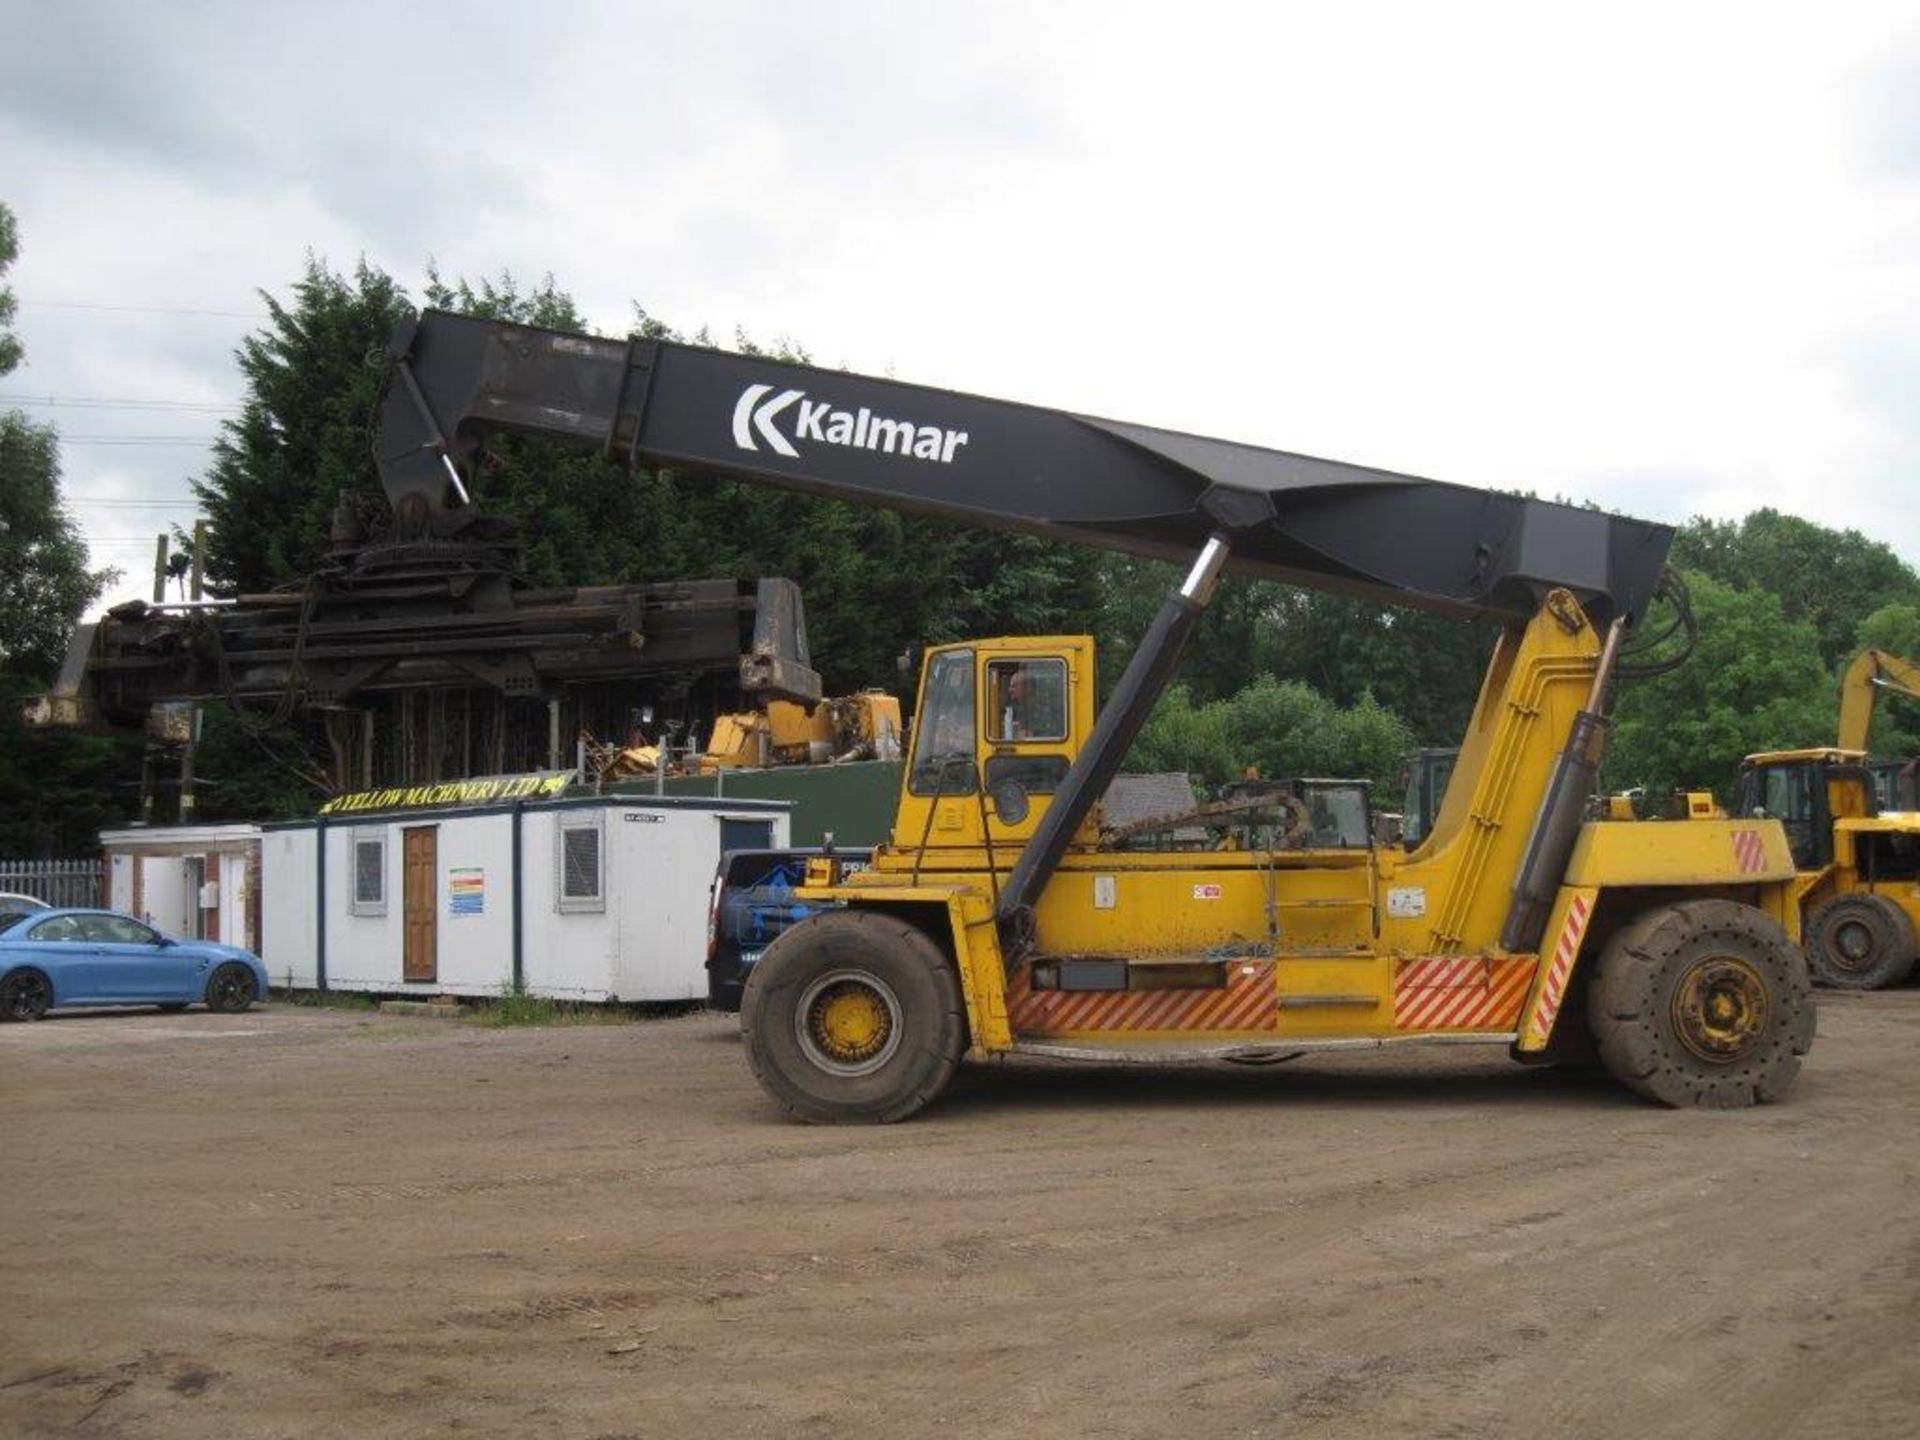 Kalmar Container Reachstacker 1994, Model is DC4161RS4, lifts 41 tonnes, runs well